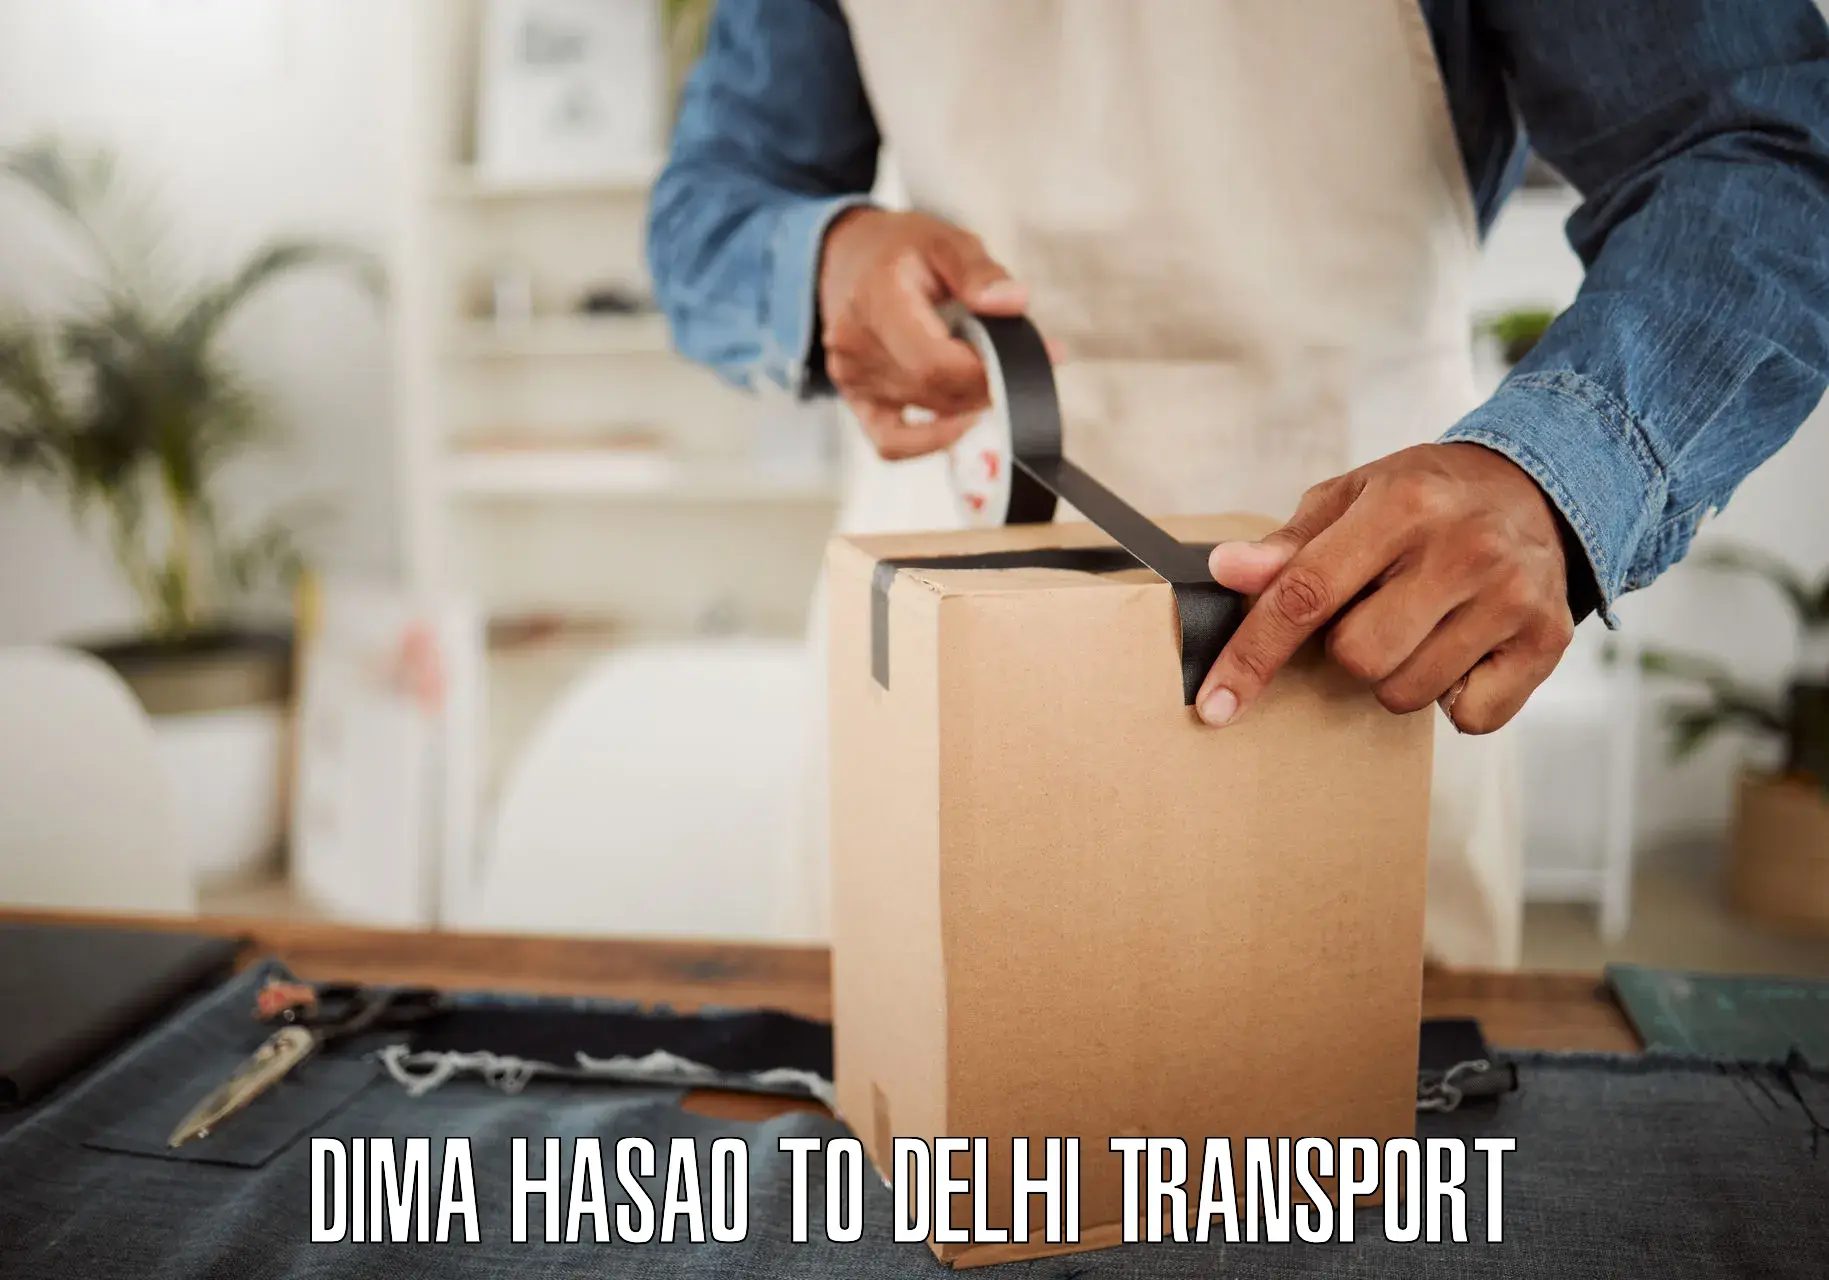 Express transport services Dima Hasao to Lodhi Road